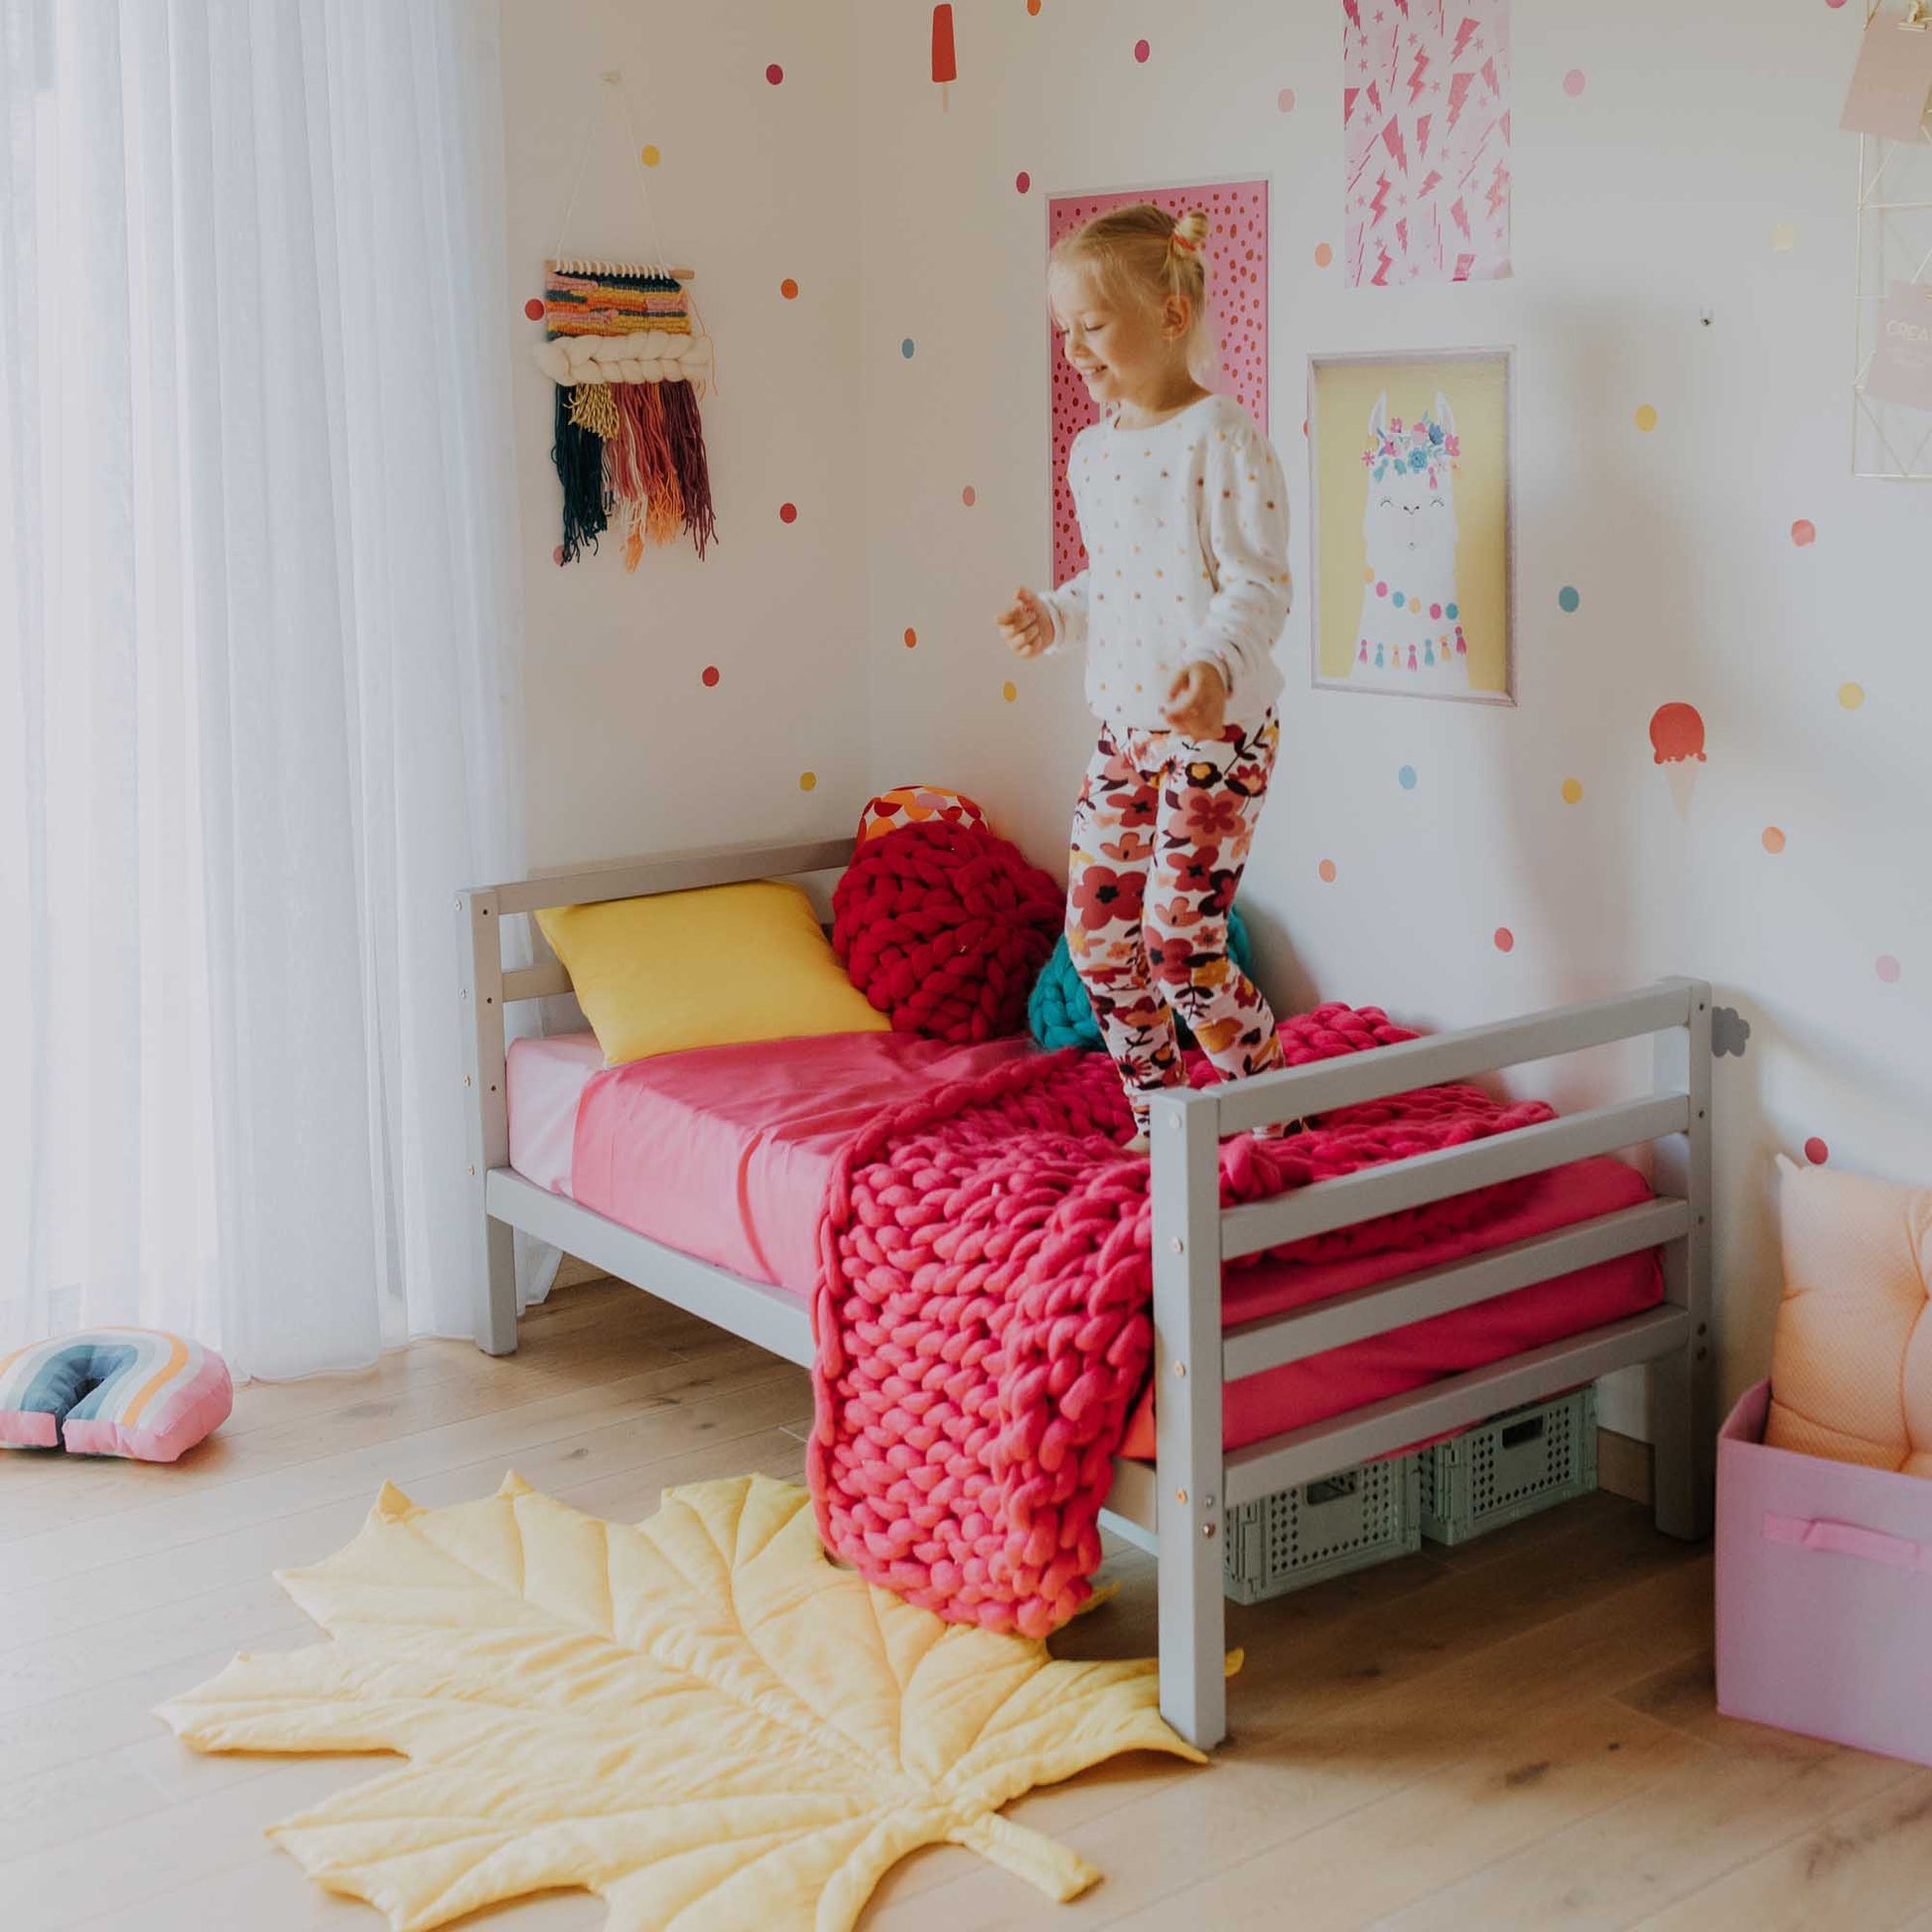 A toddler standing on a Sweet Home From Wood Kids' bed on legs with a horizontal rail headboard and footboard in her girl's room.